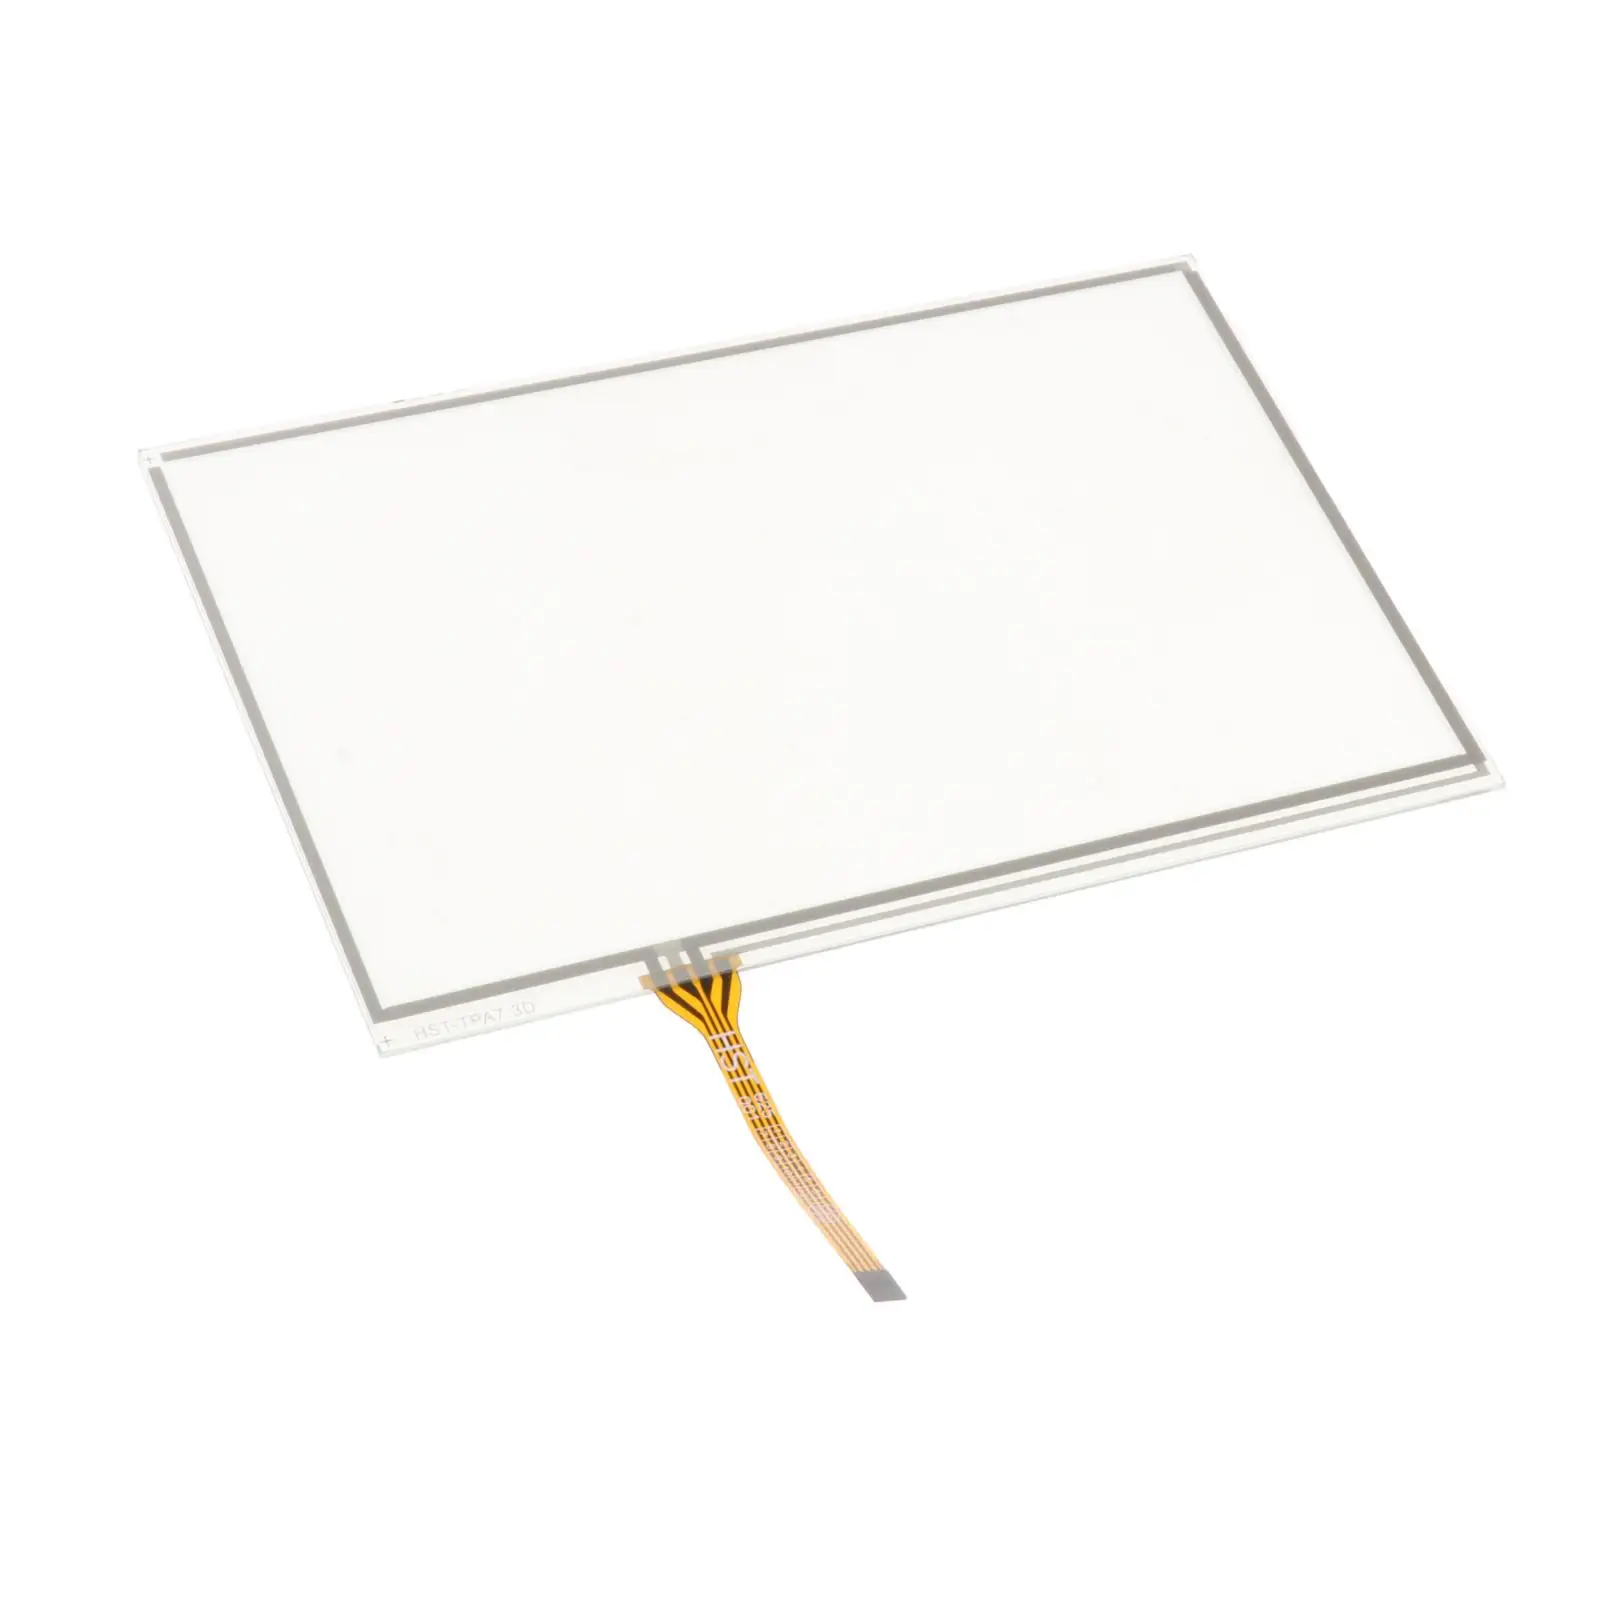 New Touch Screen Glass Digitizer for Lexus IS250 IS300 IS350 ISF GS Prius Navigation